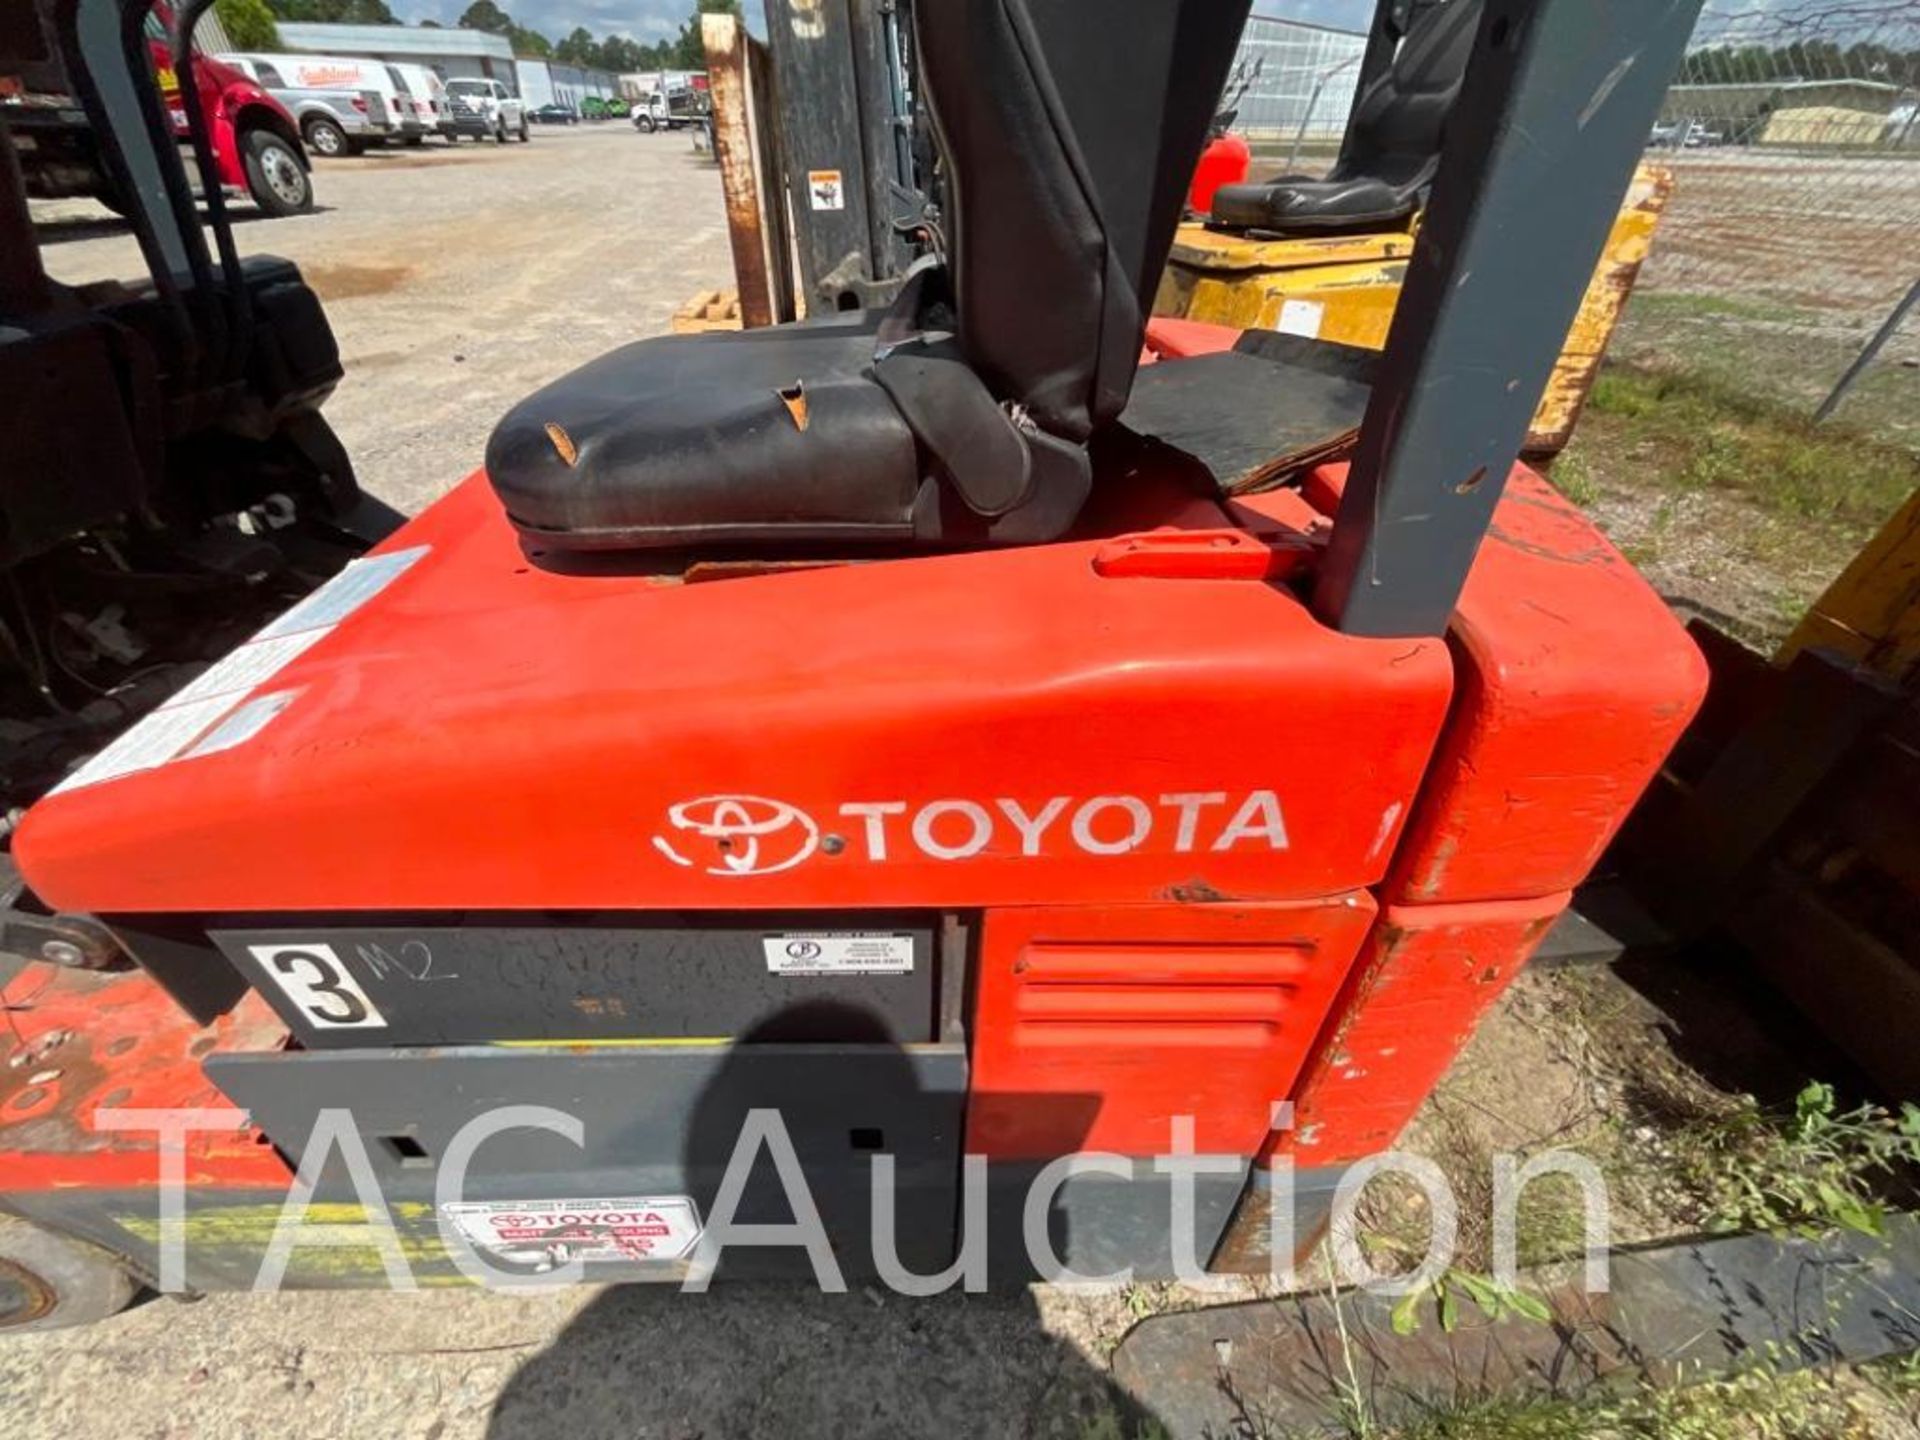 Toyota 2FBEU18 Electric Forklift - Image 13 of 28